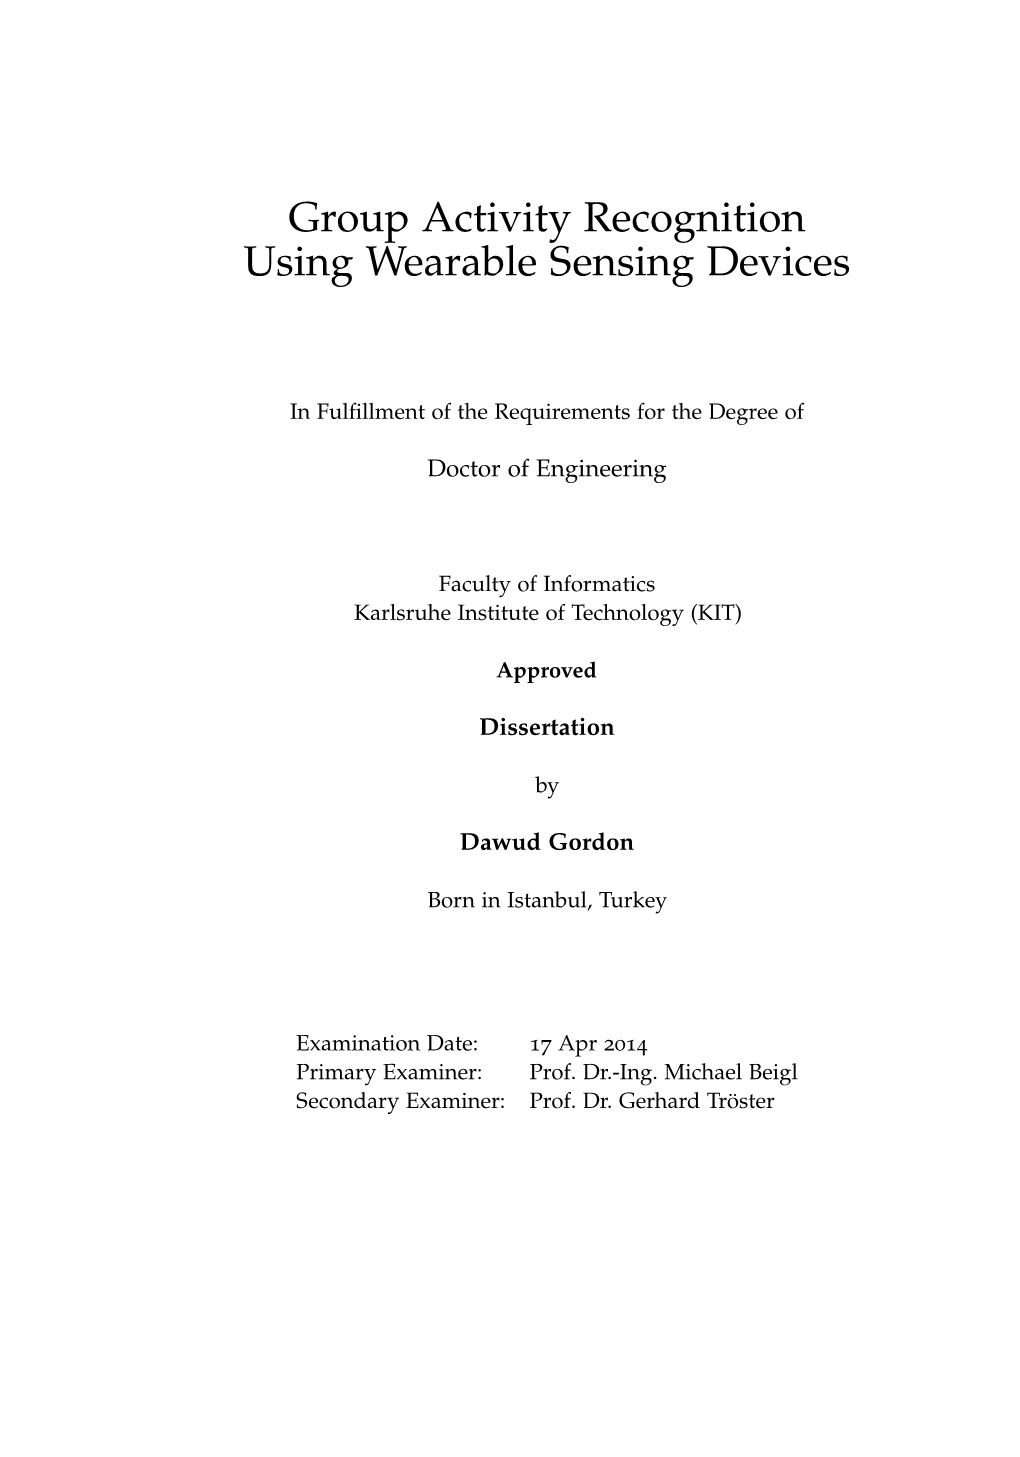 Group Activity Recognition Using Wearable Sensing Devices